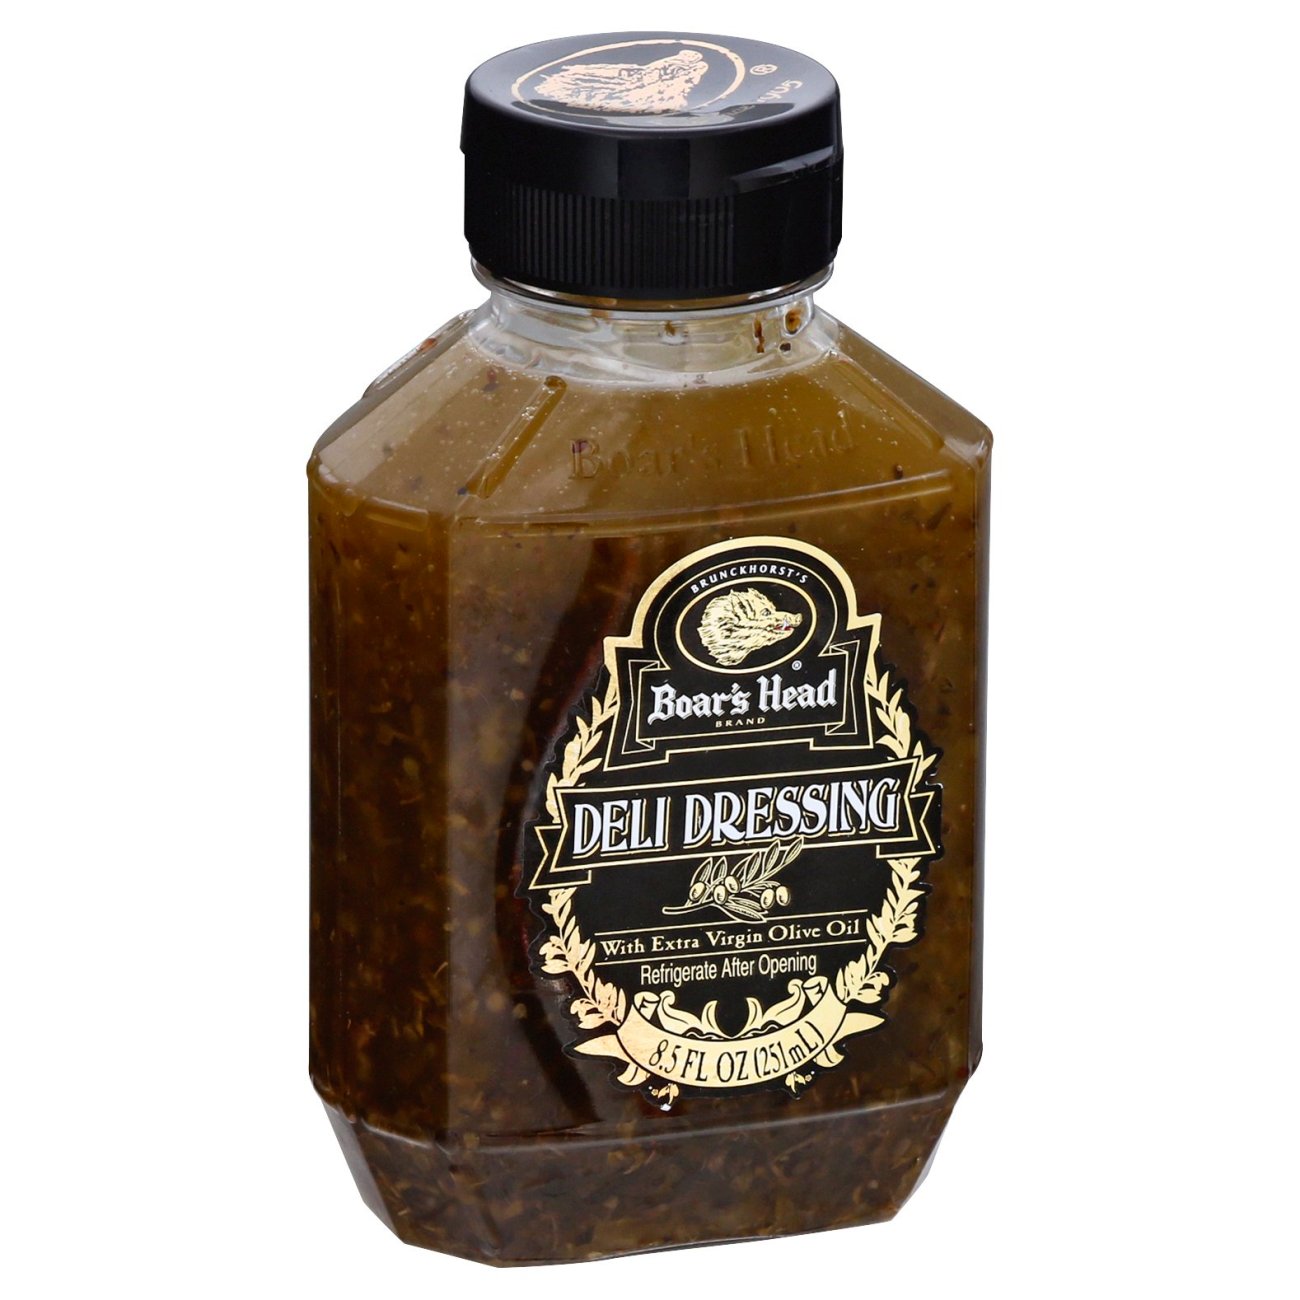 Boar's Head Deli Sandwich Dressing Made with Extra Virgin Olive Oil